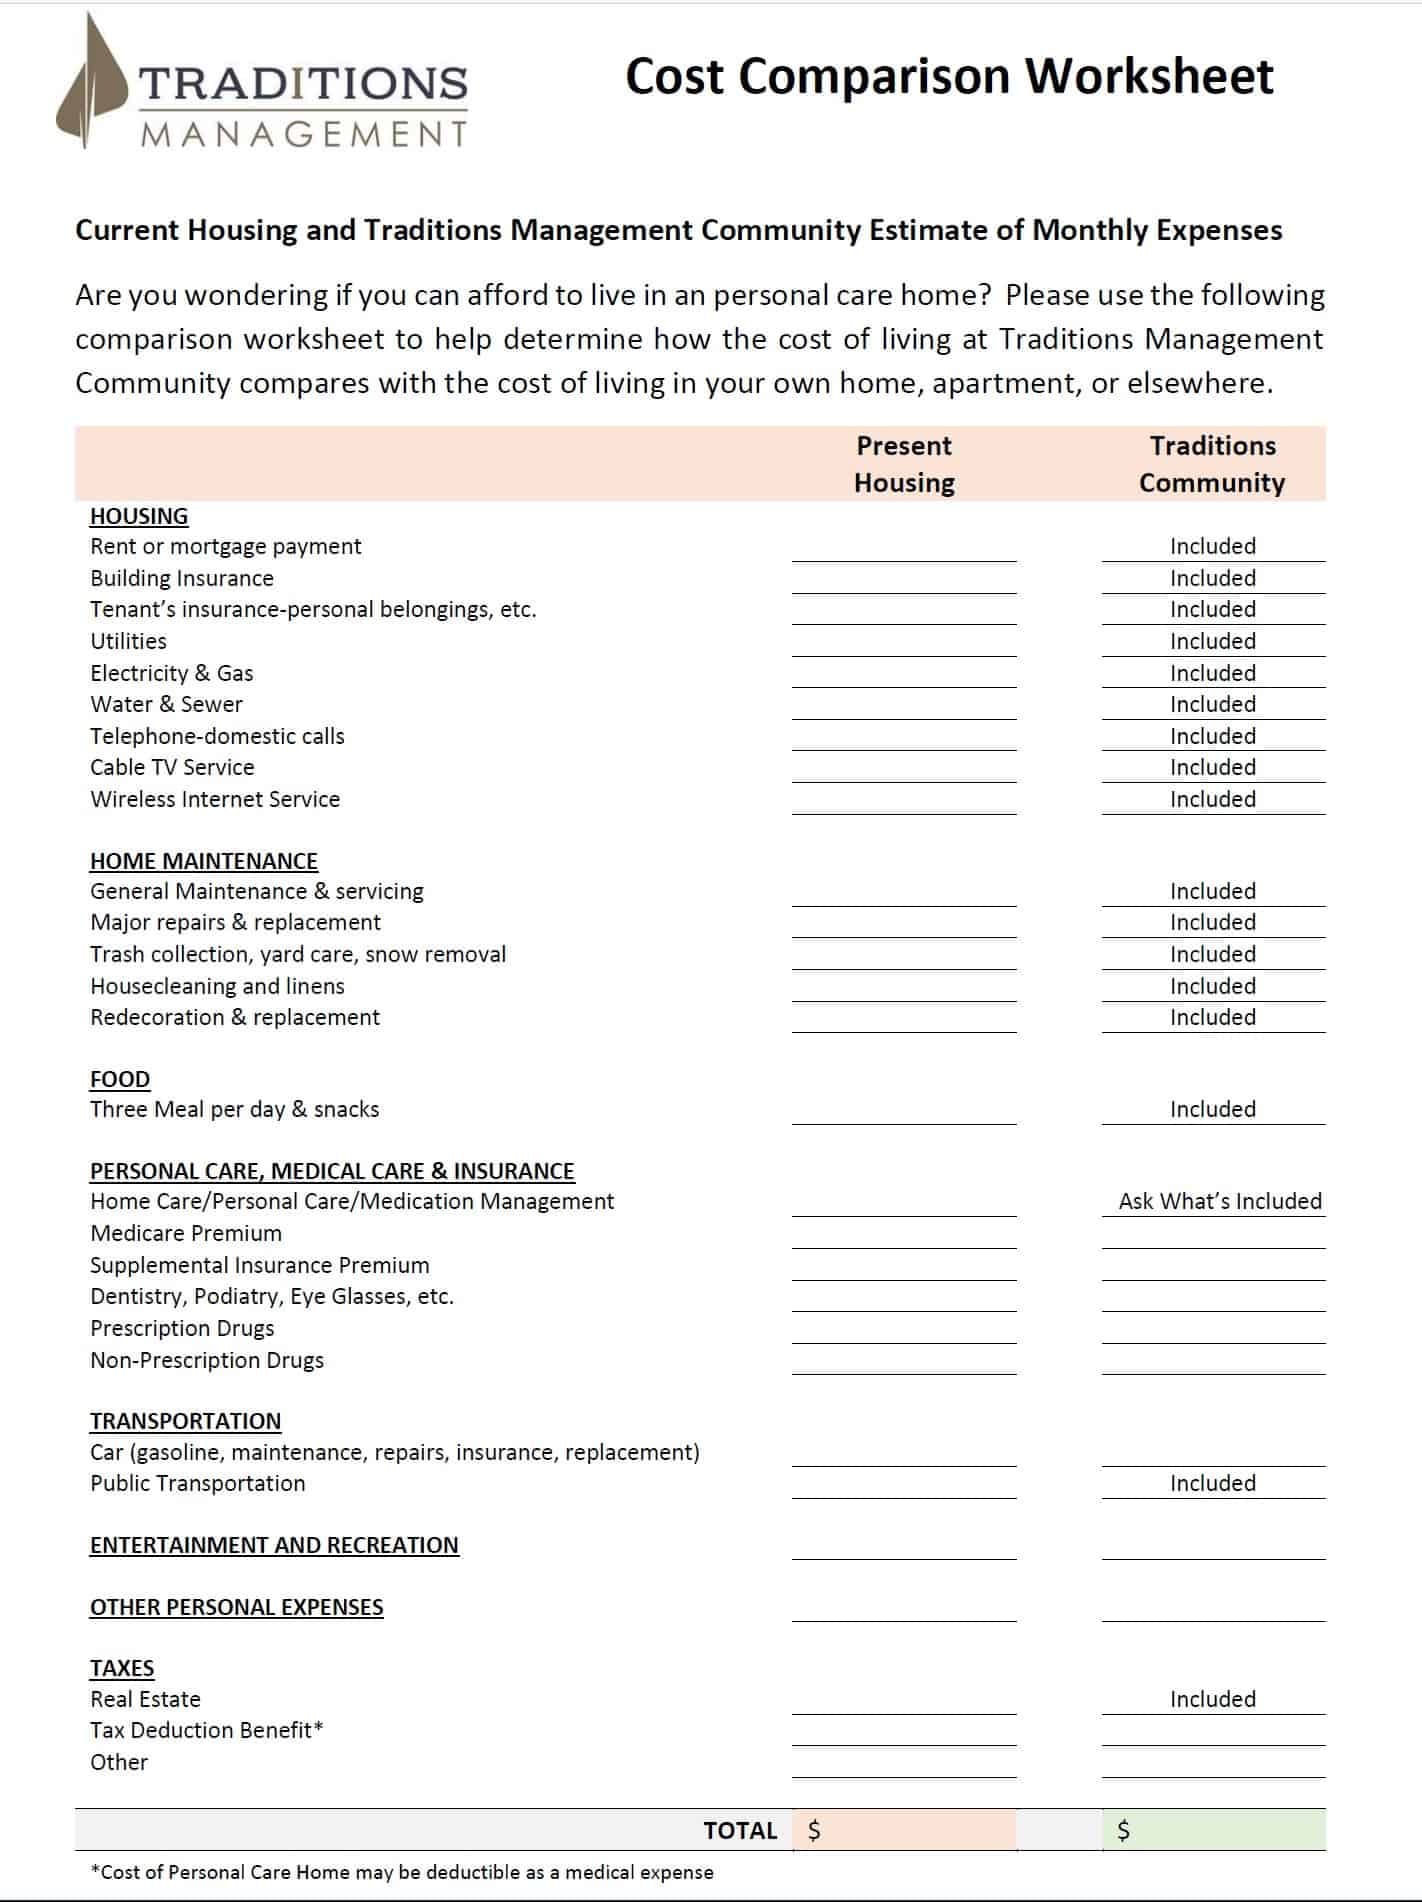 assisted-living-cost-comparison-worksheet-db-excel